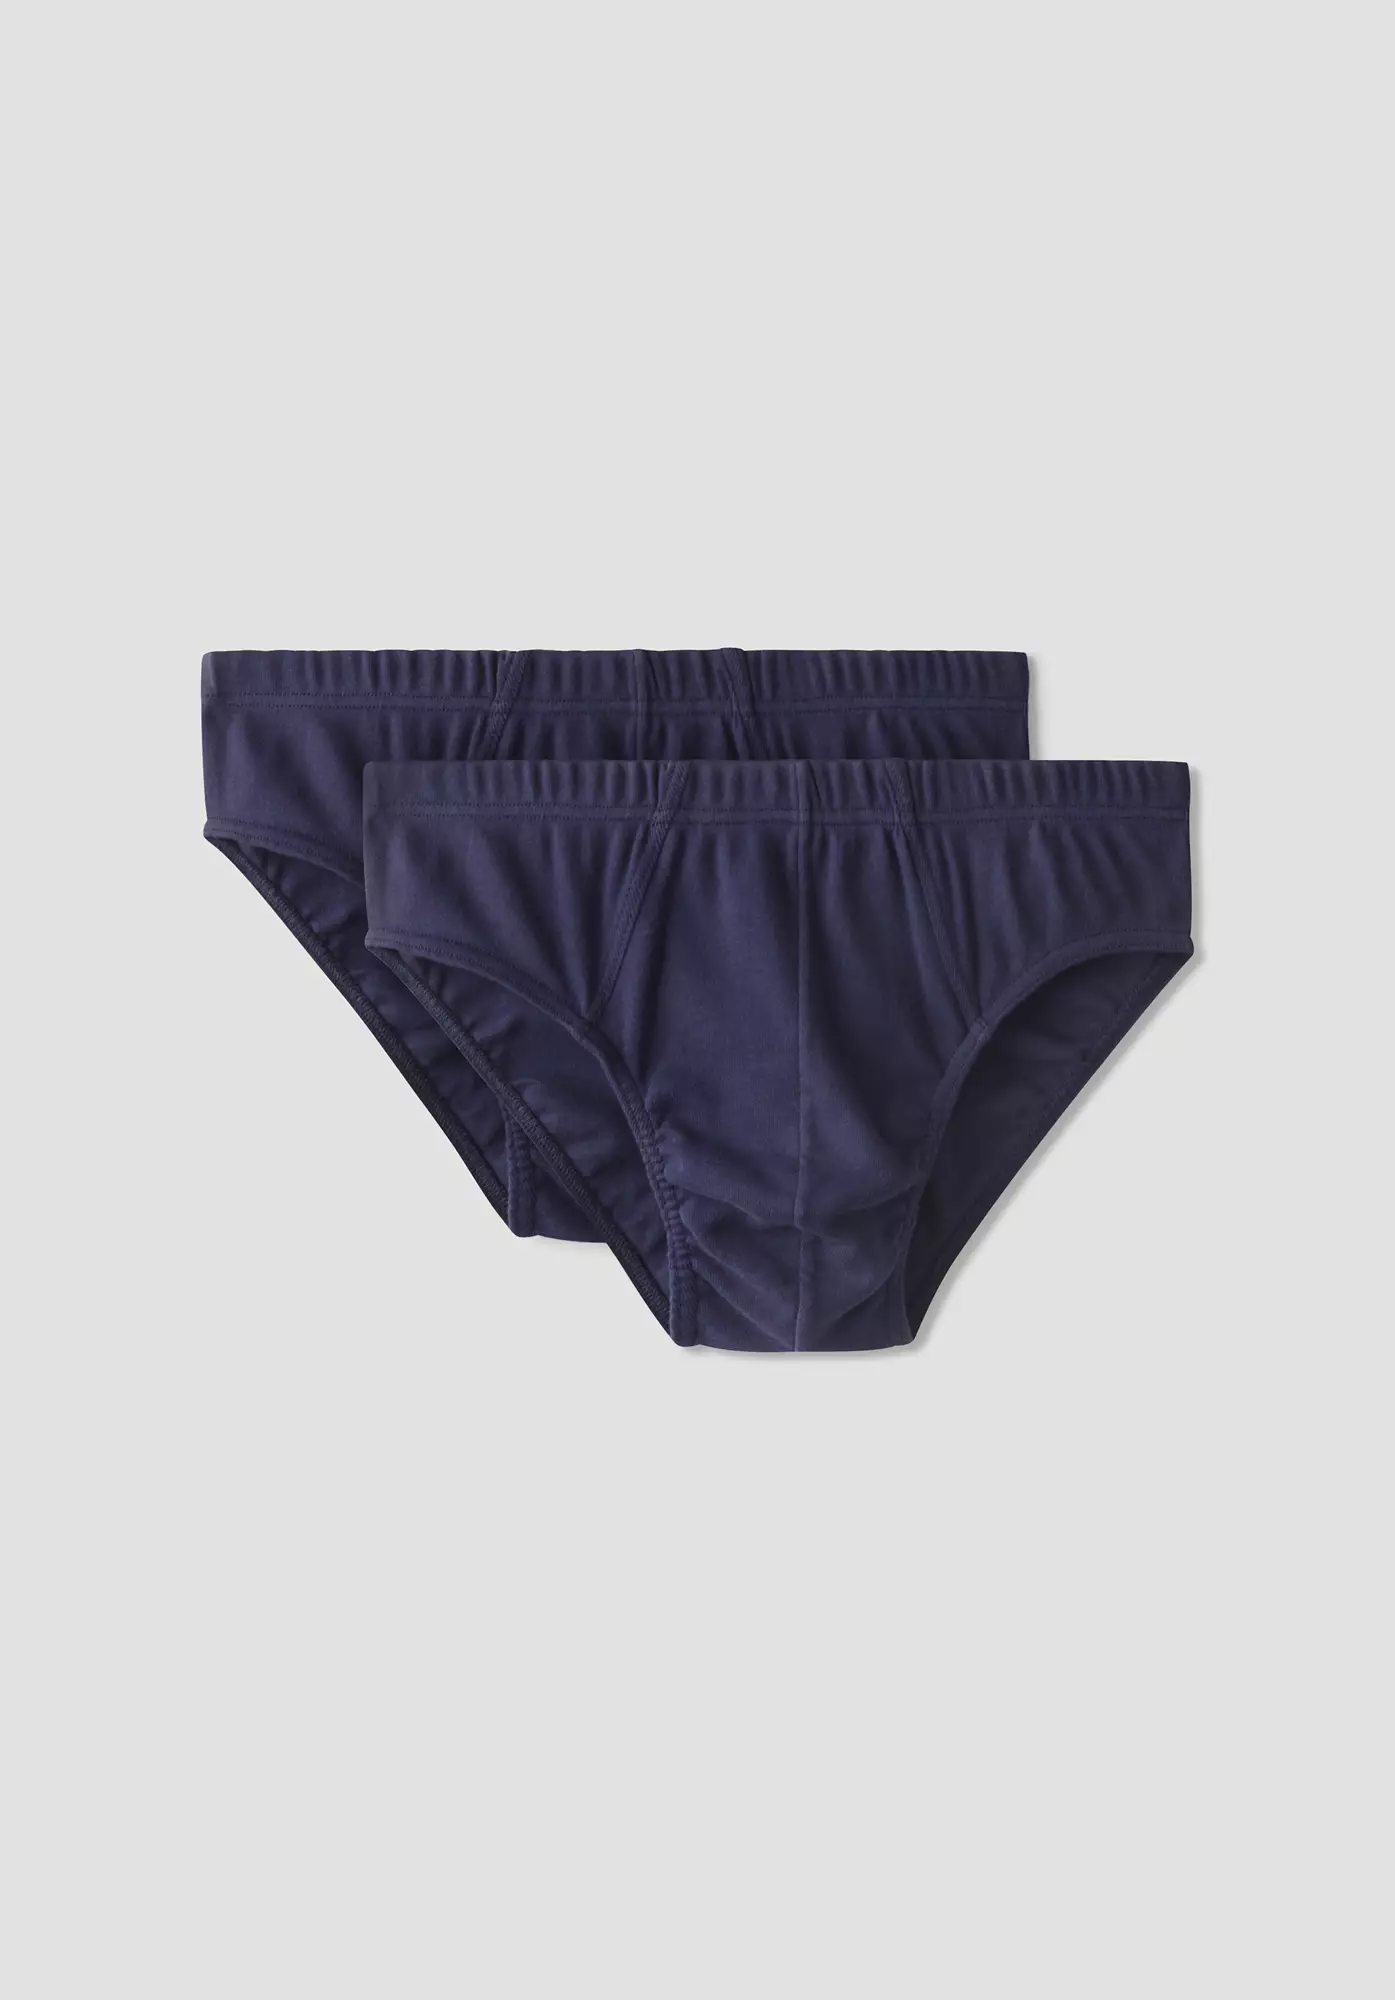 PureDAILY briefs in a set of 2 made of pure organic cotton - 3